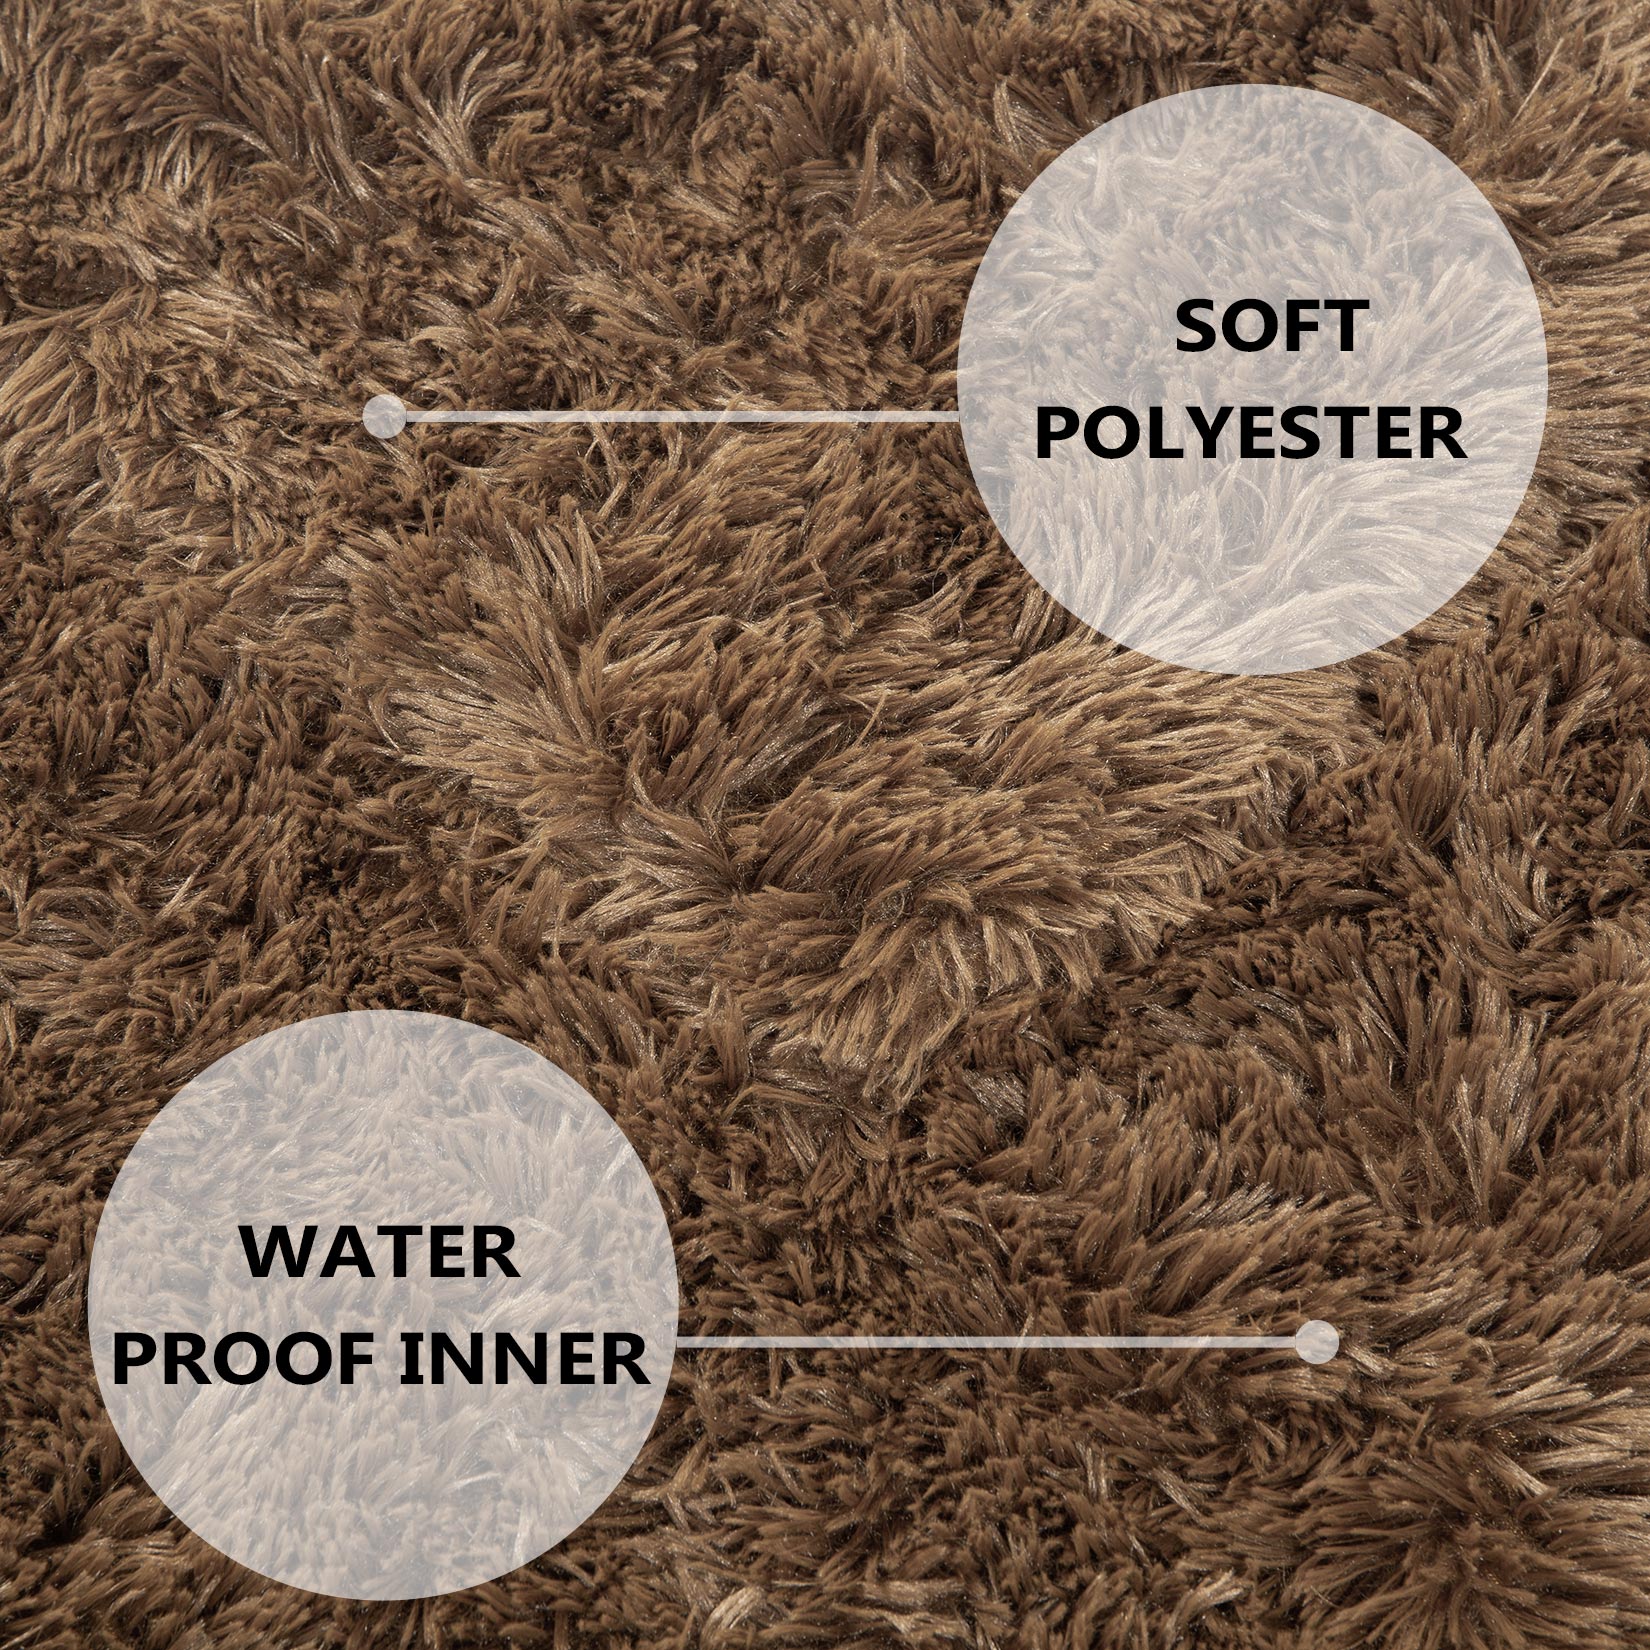 HA-EMORE Waterproof Dog Blanket for Bed Couch Sofa Soft Warm Fluffy Faux Fur Fleece Puppy Blankets Machine Washable Pet Blanket Brown 60×80cm - image 4 of 4